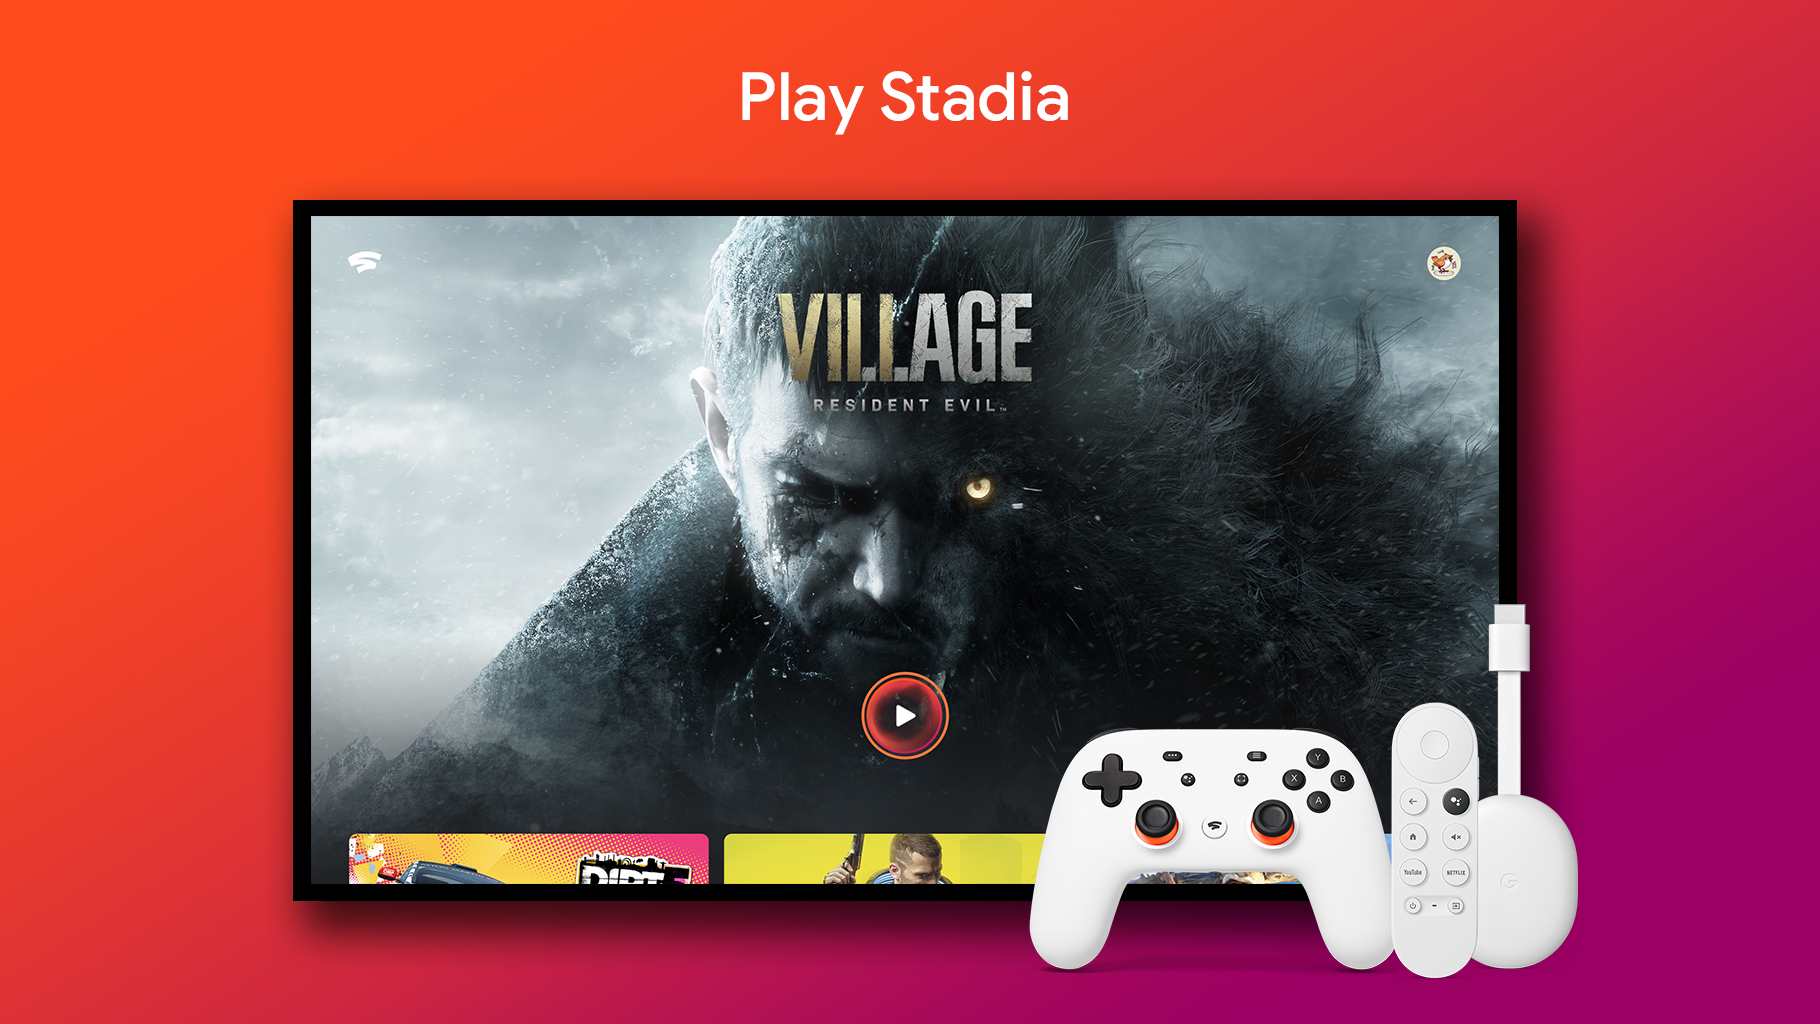 Google TV owners can get a discount on a Stadia controller till 30 July. Image: Google